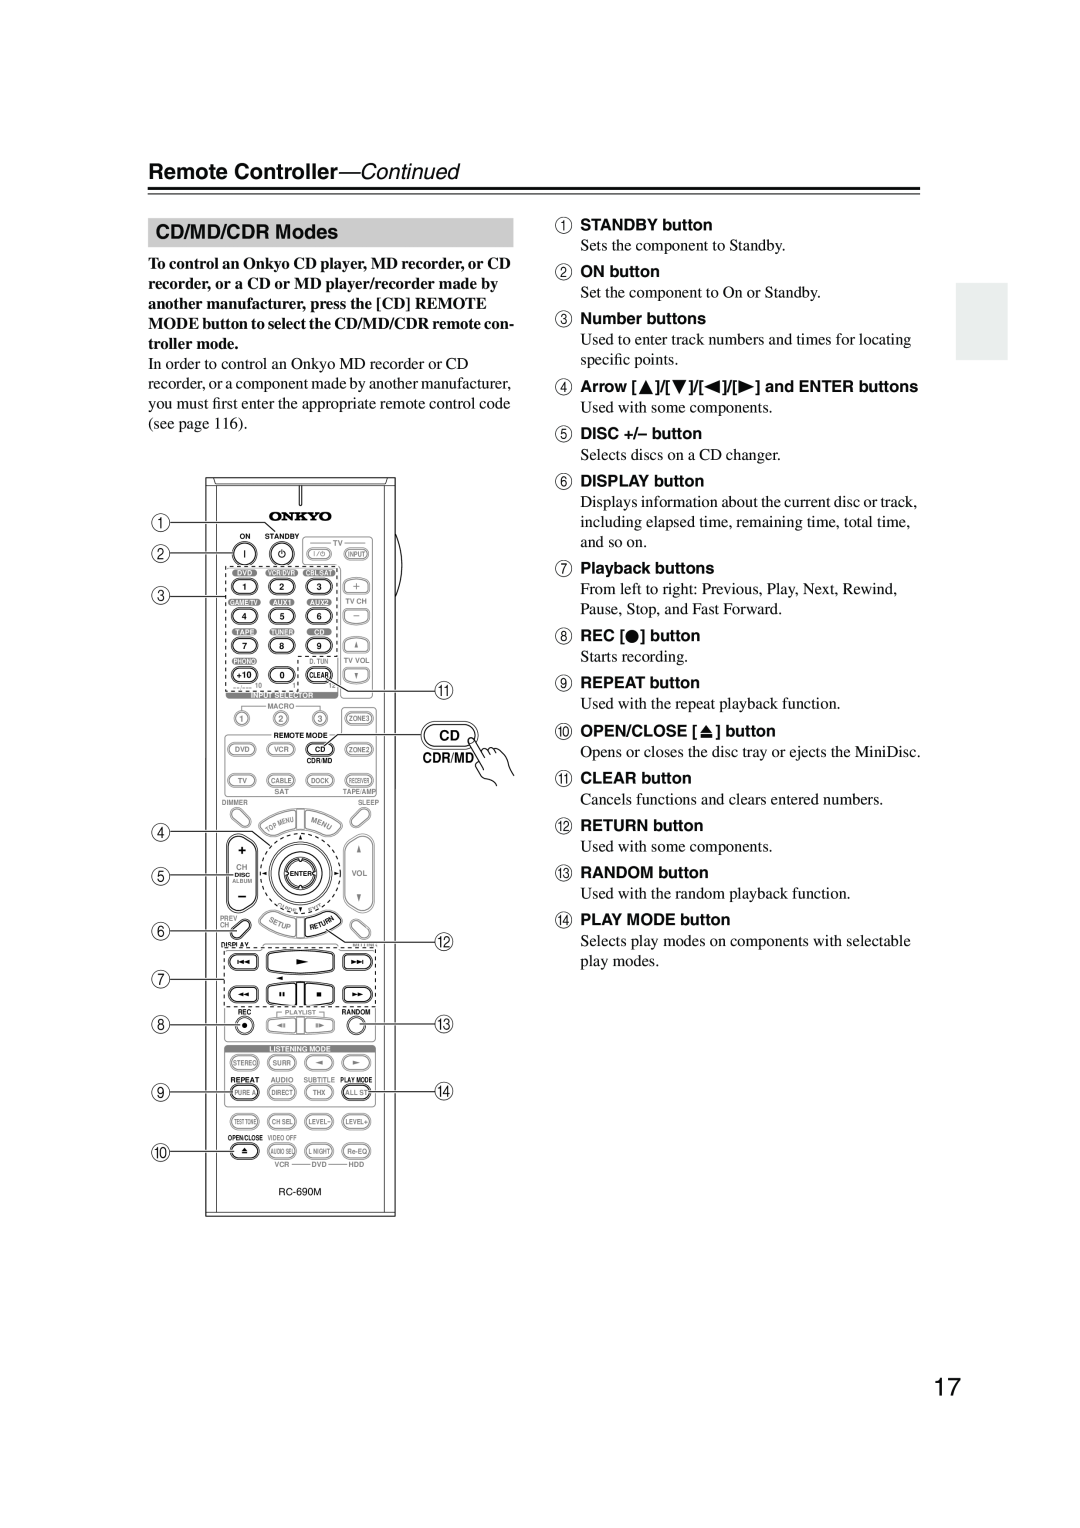 Onkyo PR-SC885 instruction manual CD/MD/CDR Modes, Remote Controller—Continued 